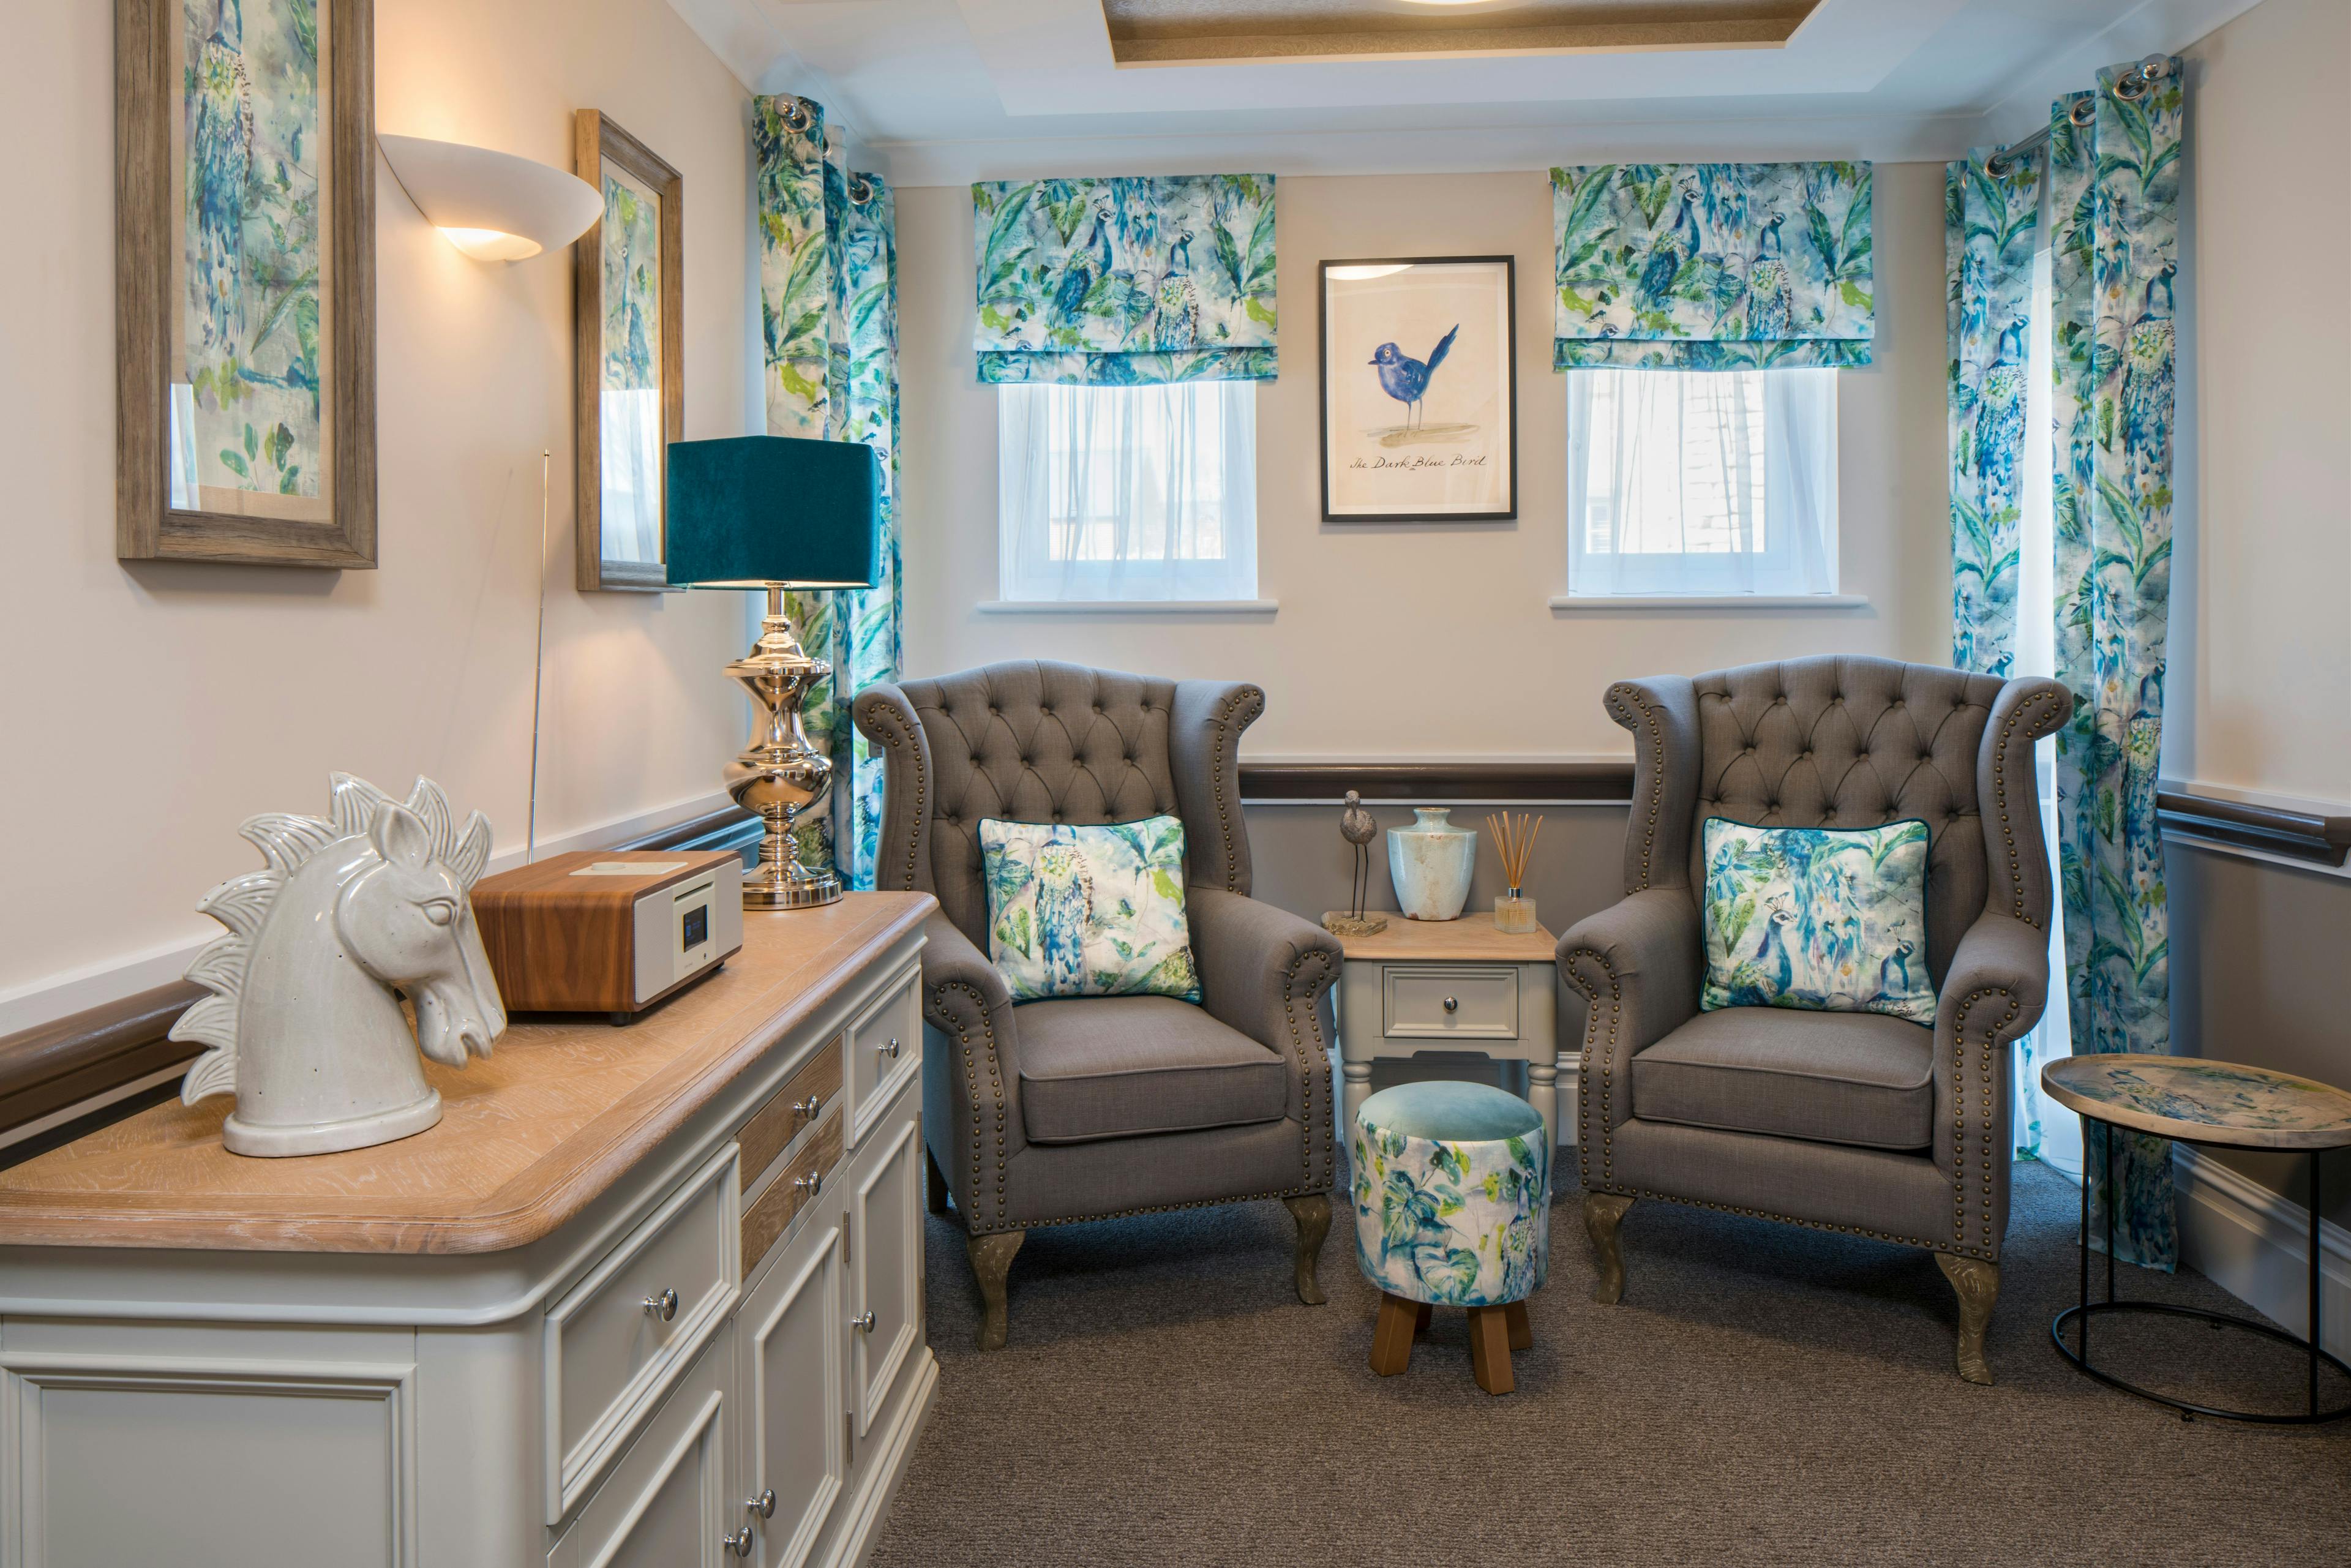 Porthaven Care Homes - Upton Mill care home 11